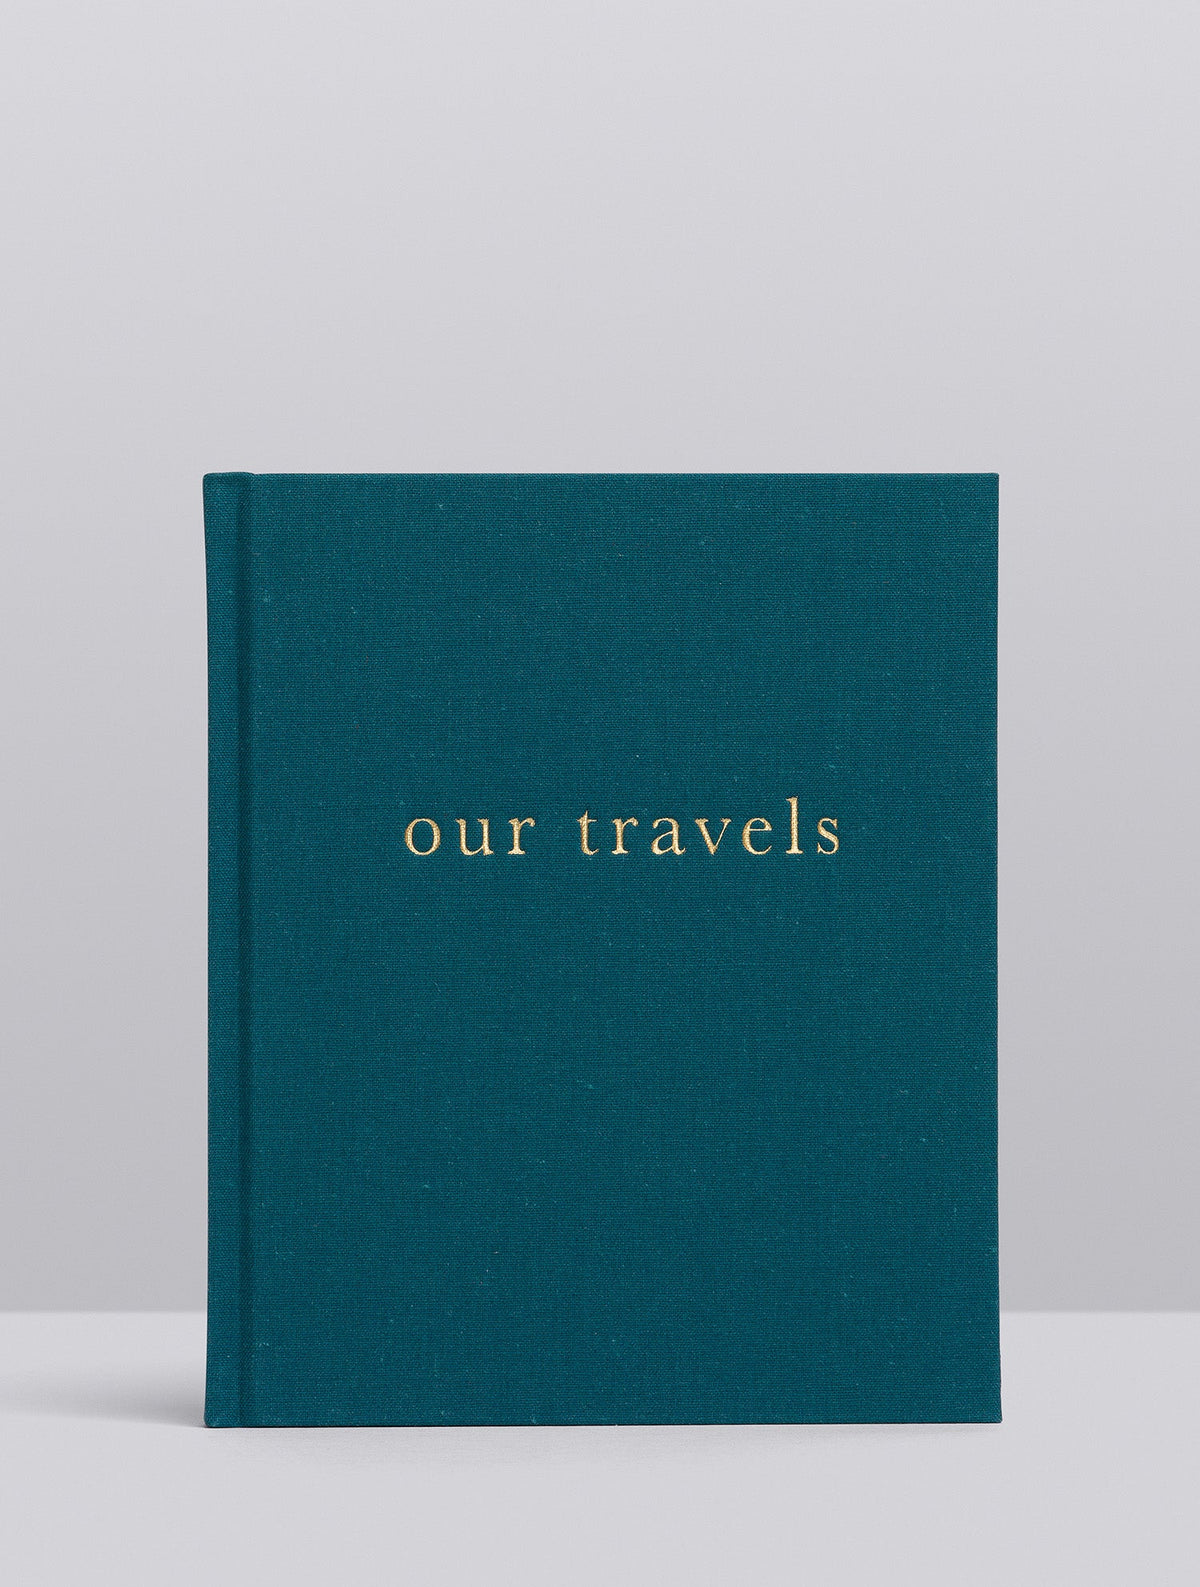 Our Favorite Travel Books